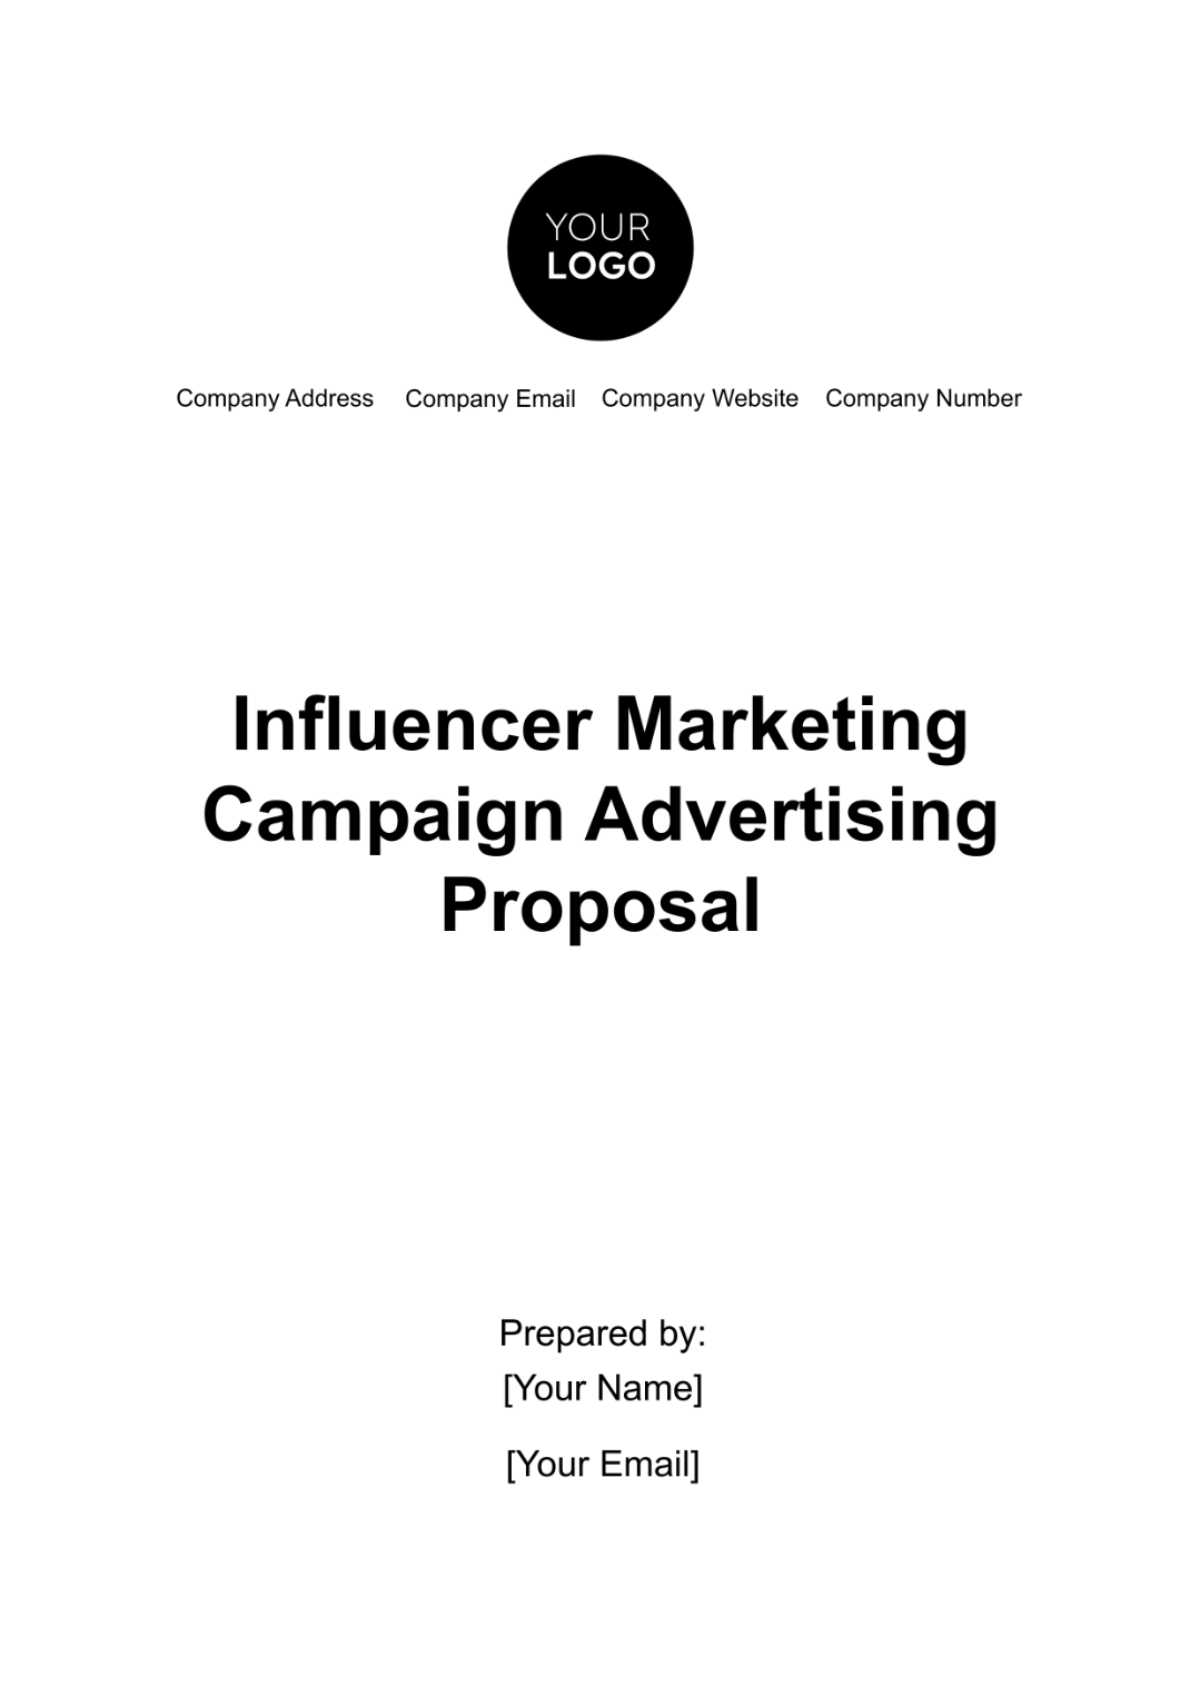 Free Influencer Marketing Campaign Advertising Proposal Template